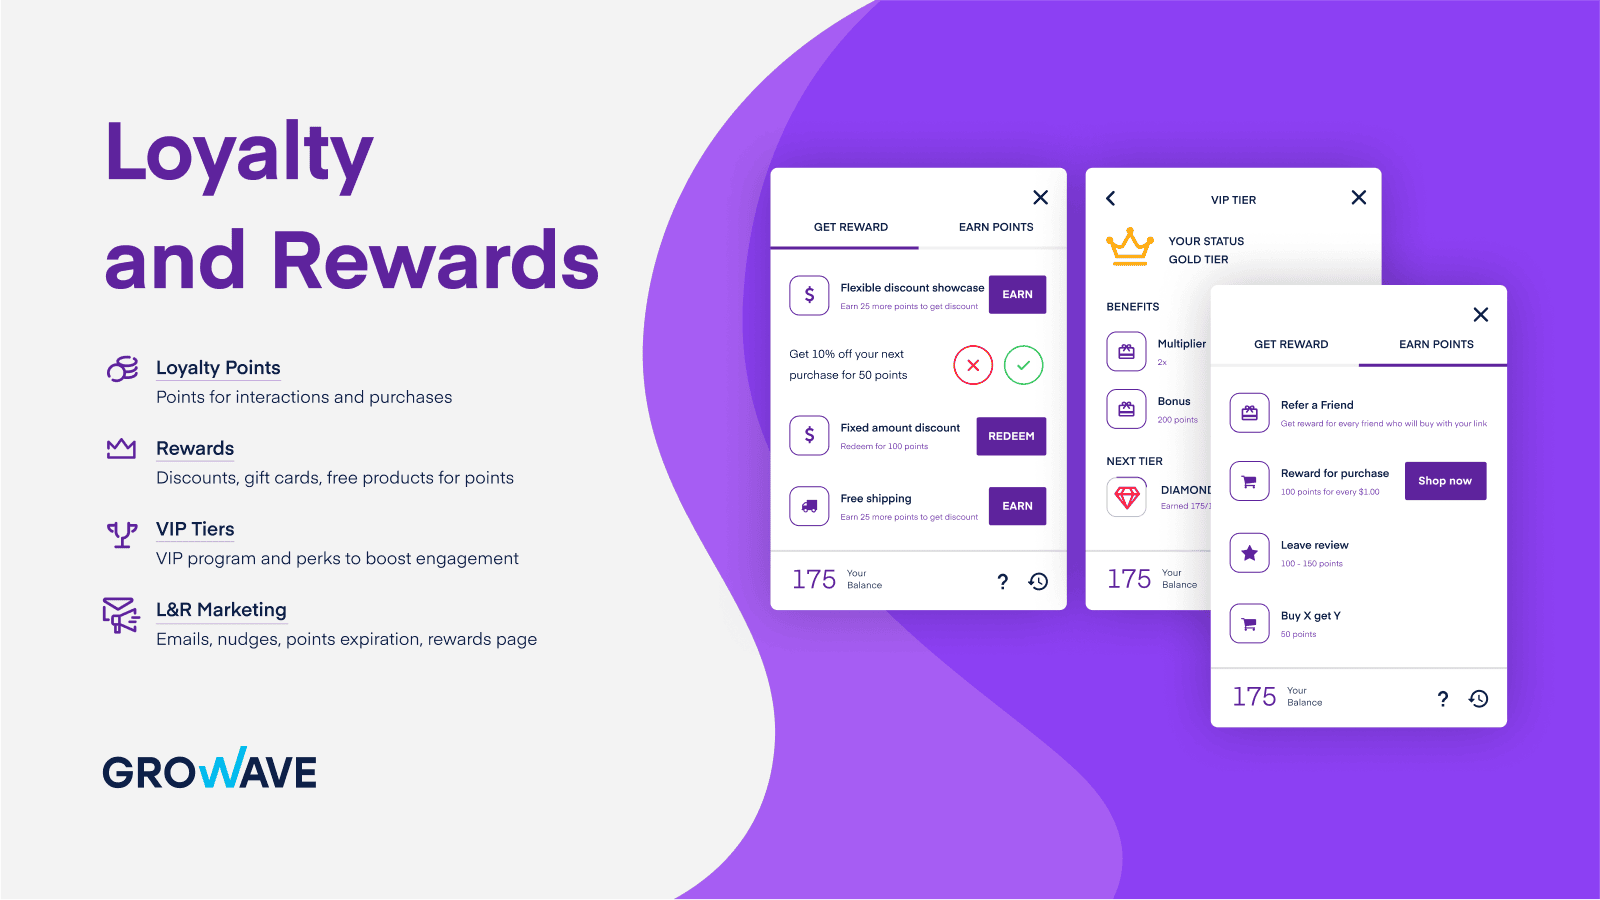 Growave's Loyalty program and rewards for Shopify stores